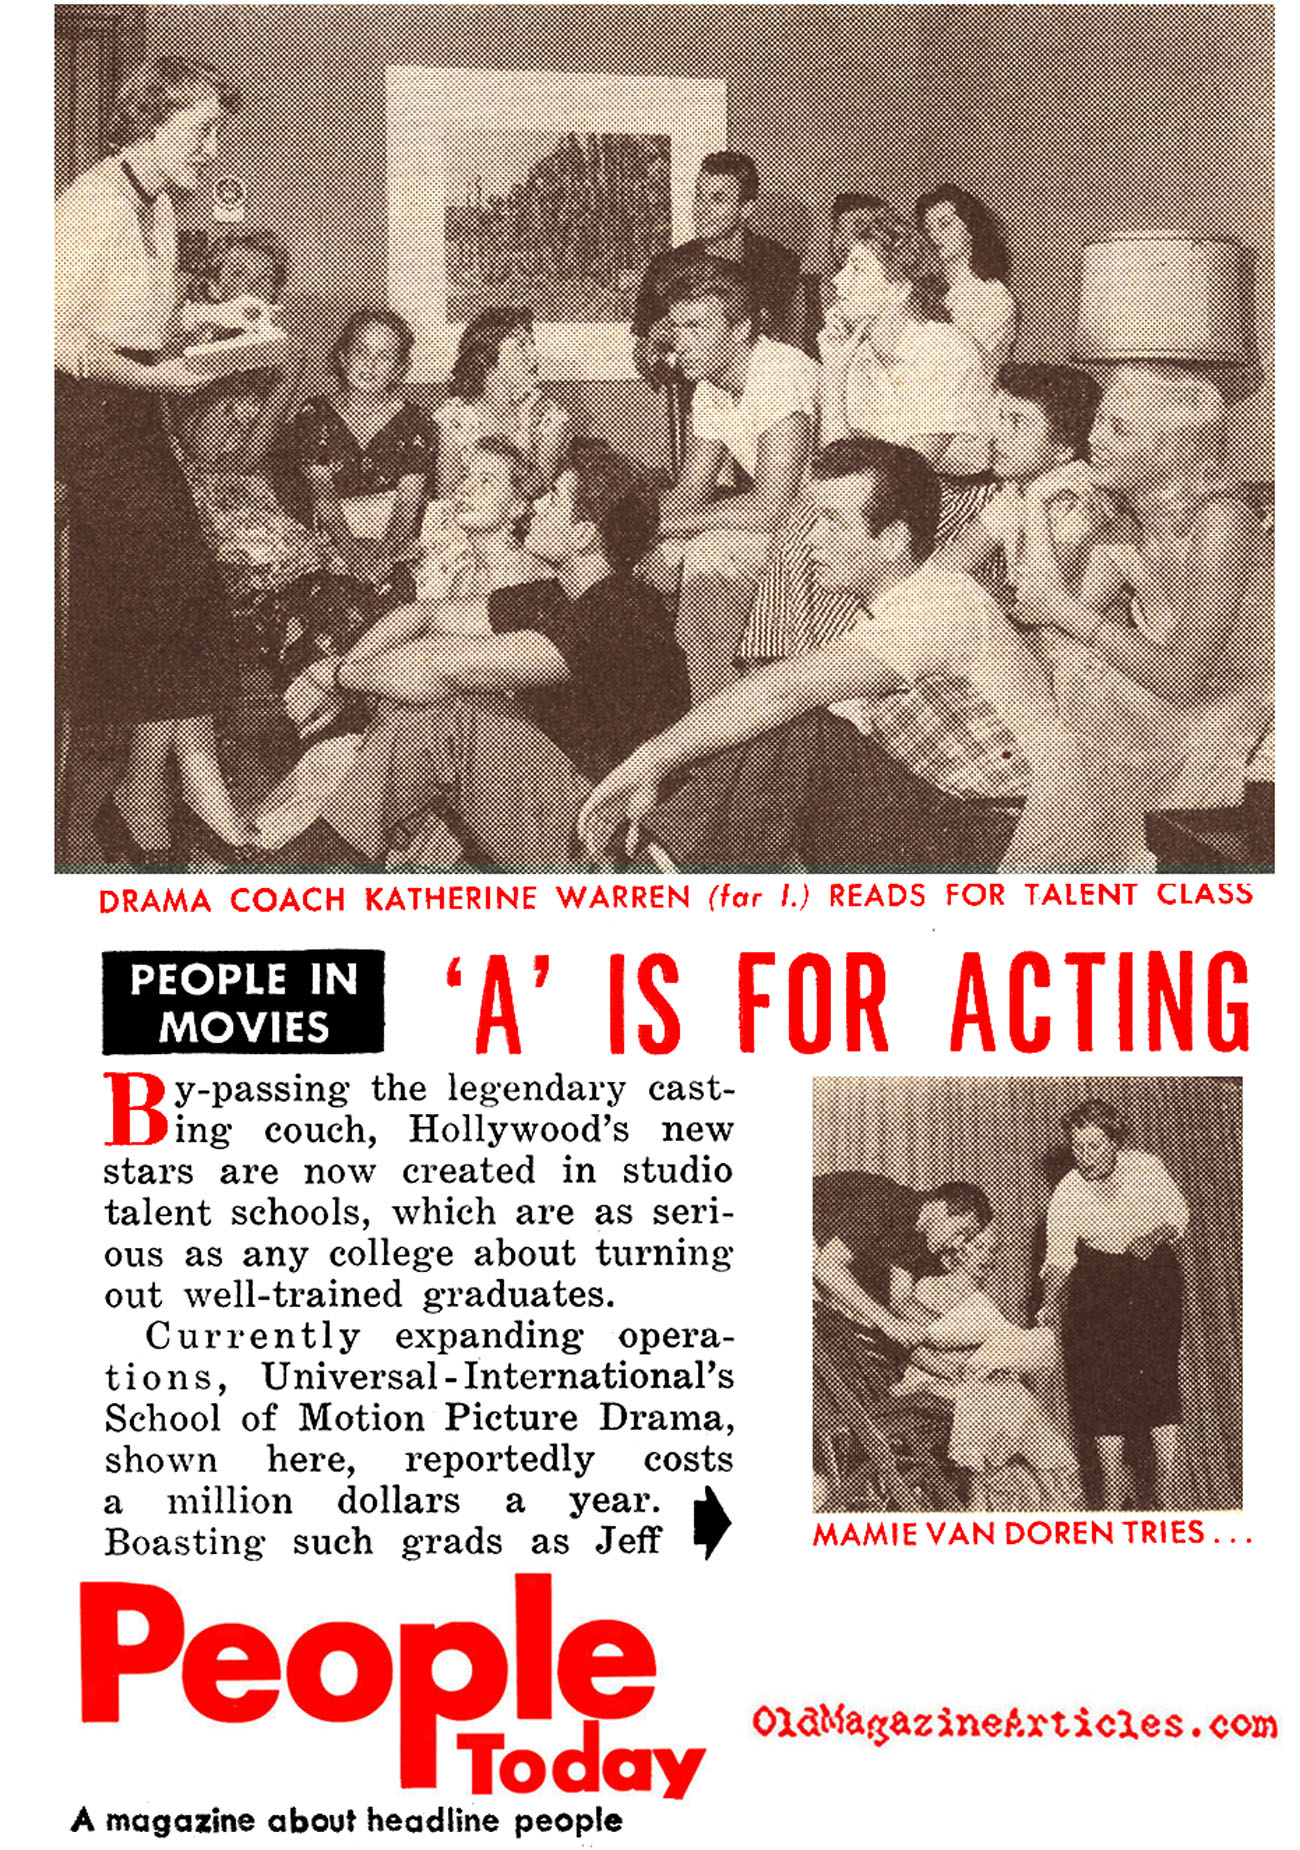 'A' is for Acting (People Today Magazine, 1955)